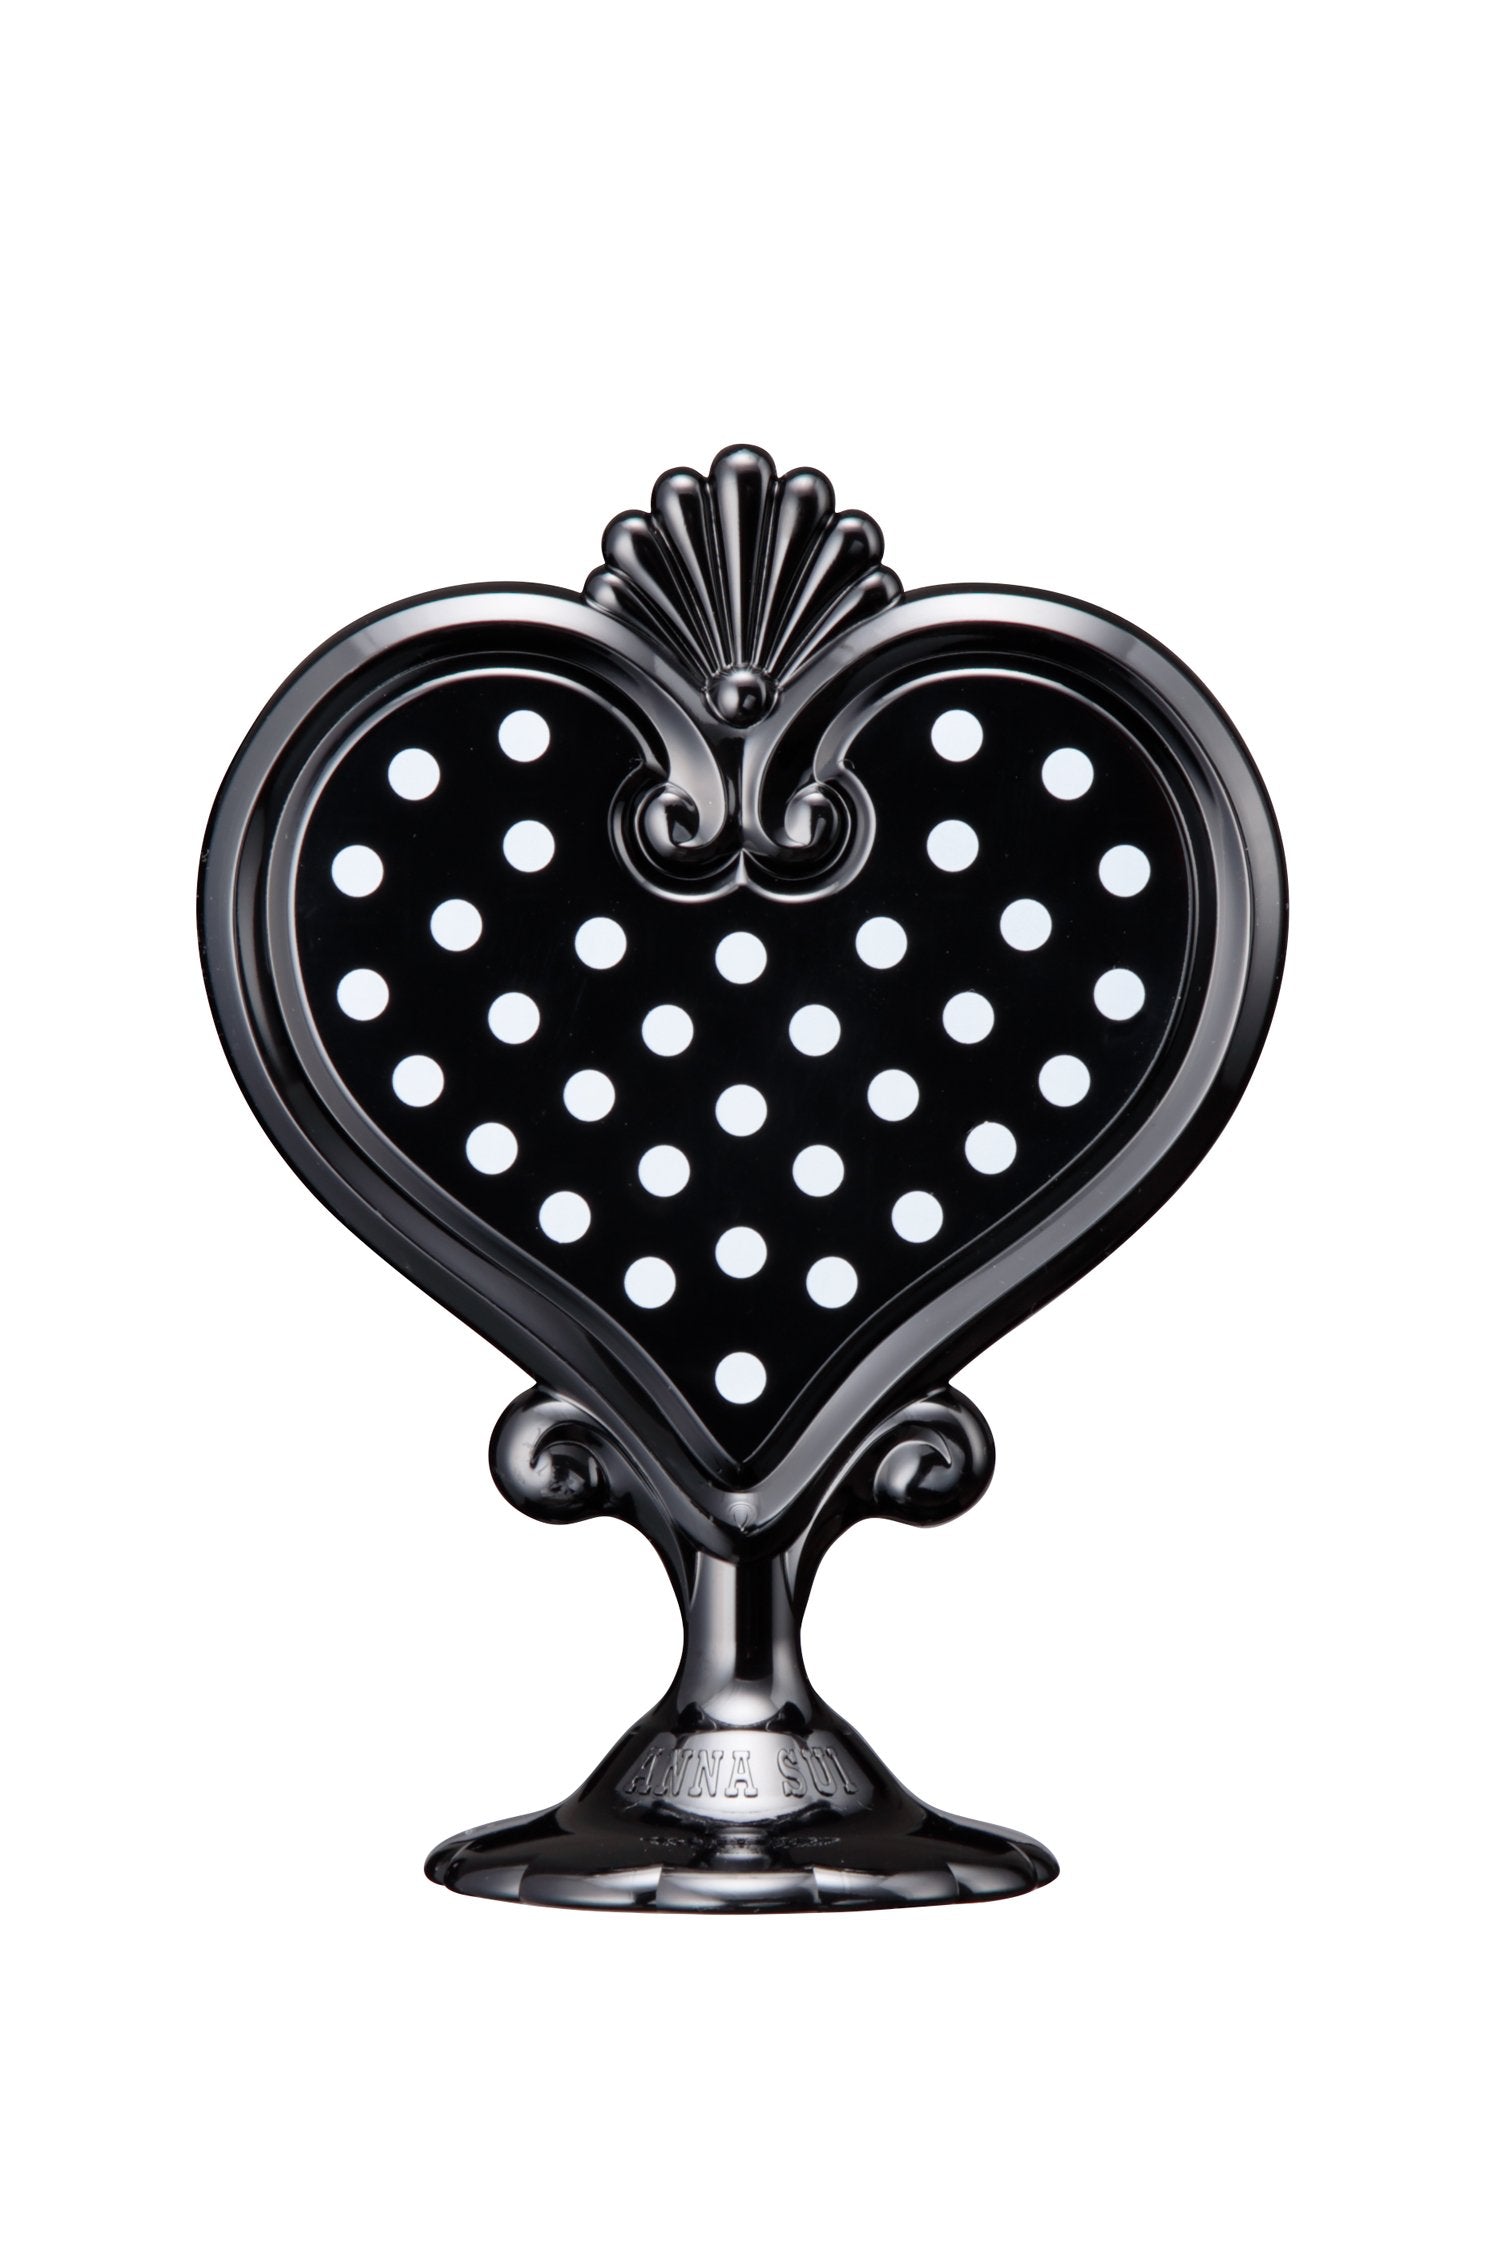 Black Stand Mirror white dots heart-shaped on one side, on a stand with Anna branding